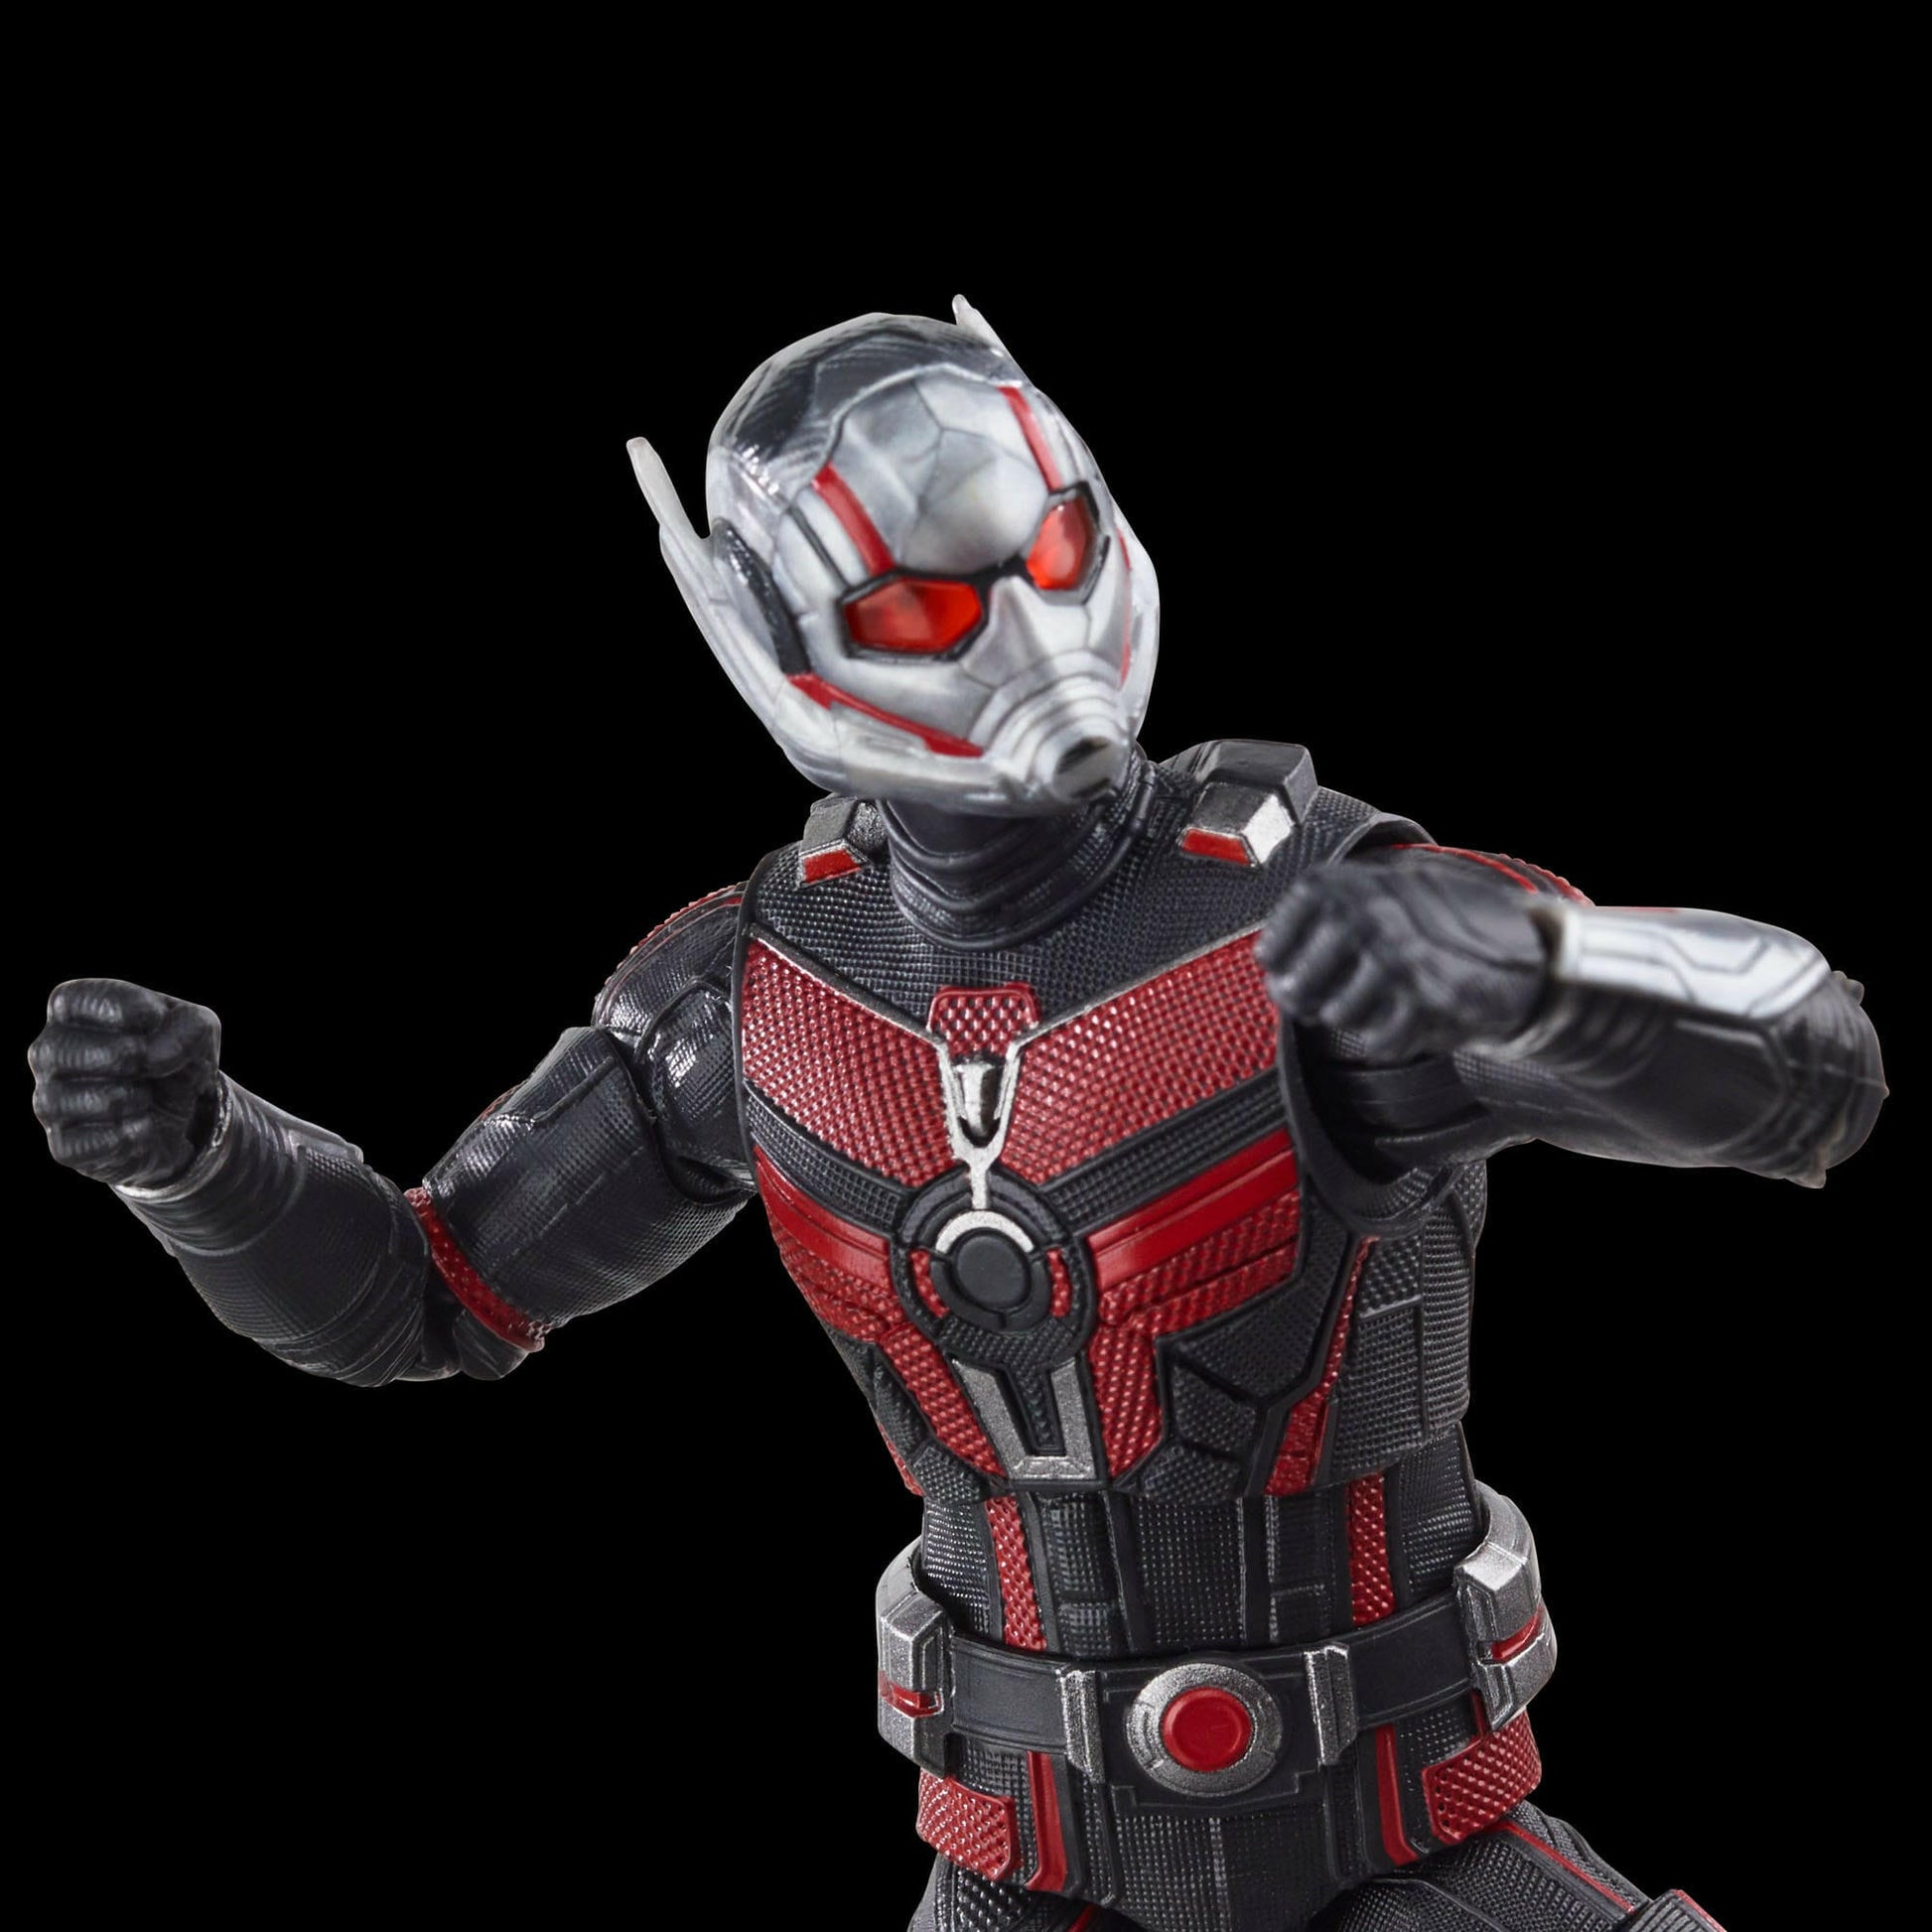 Marvel Legends Ant-Man and the Wasp: Quantumania Actionfigur BAF: Cassie Lang Ant-Man 15cm Hasbro